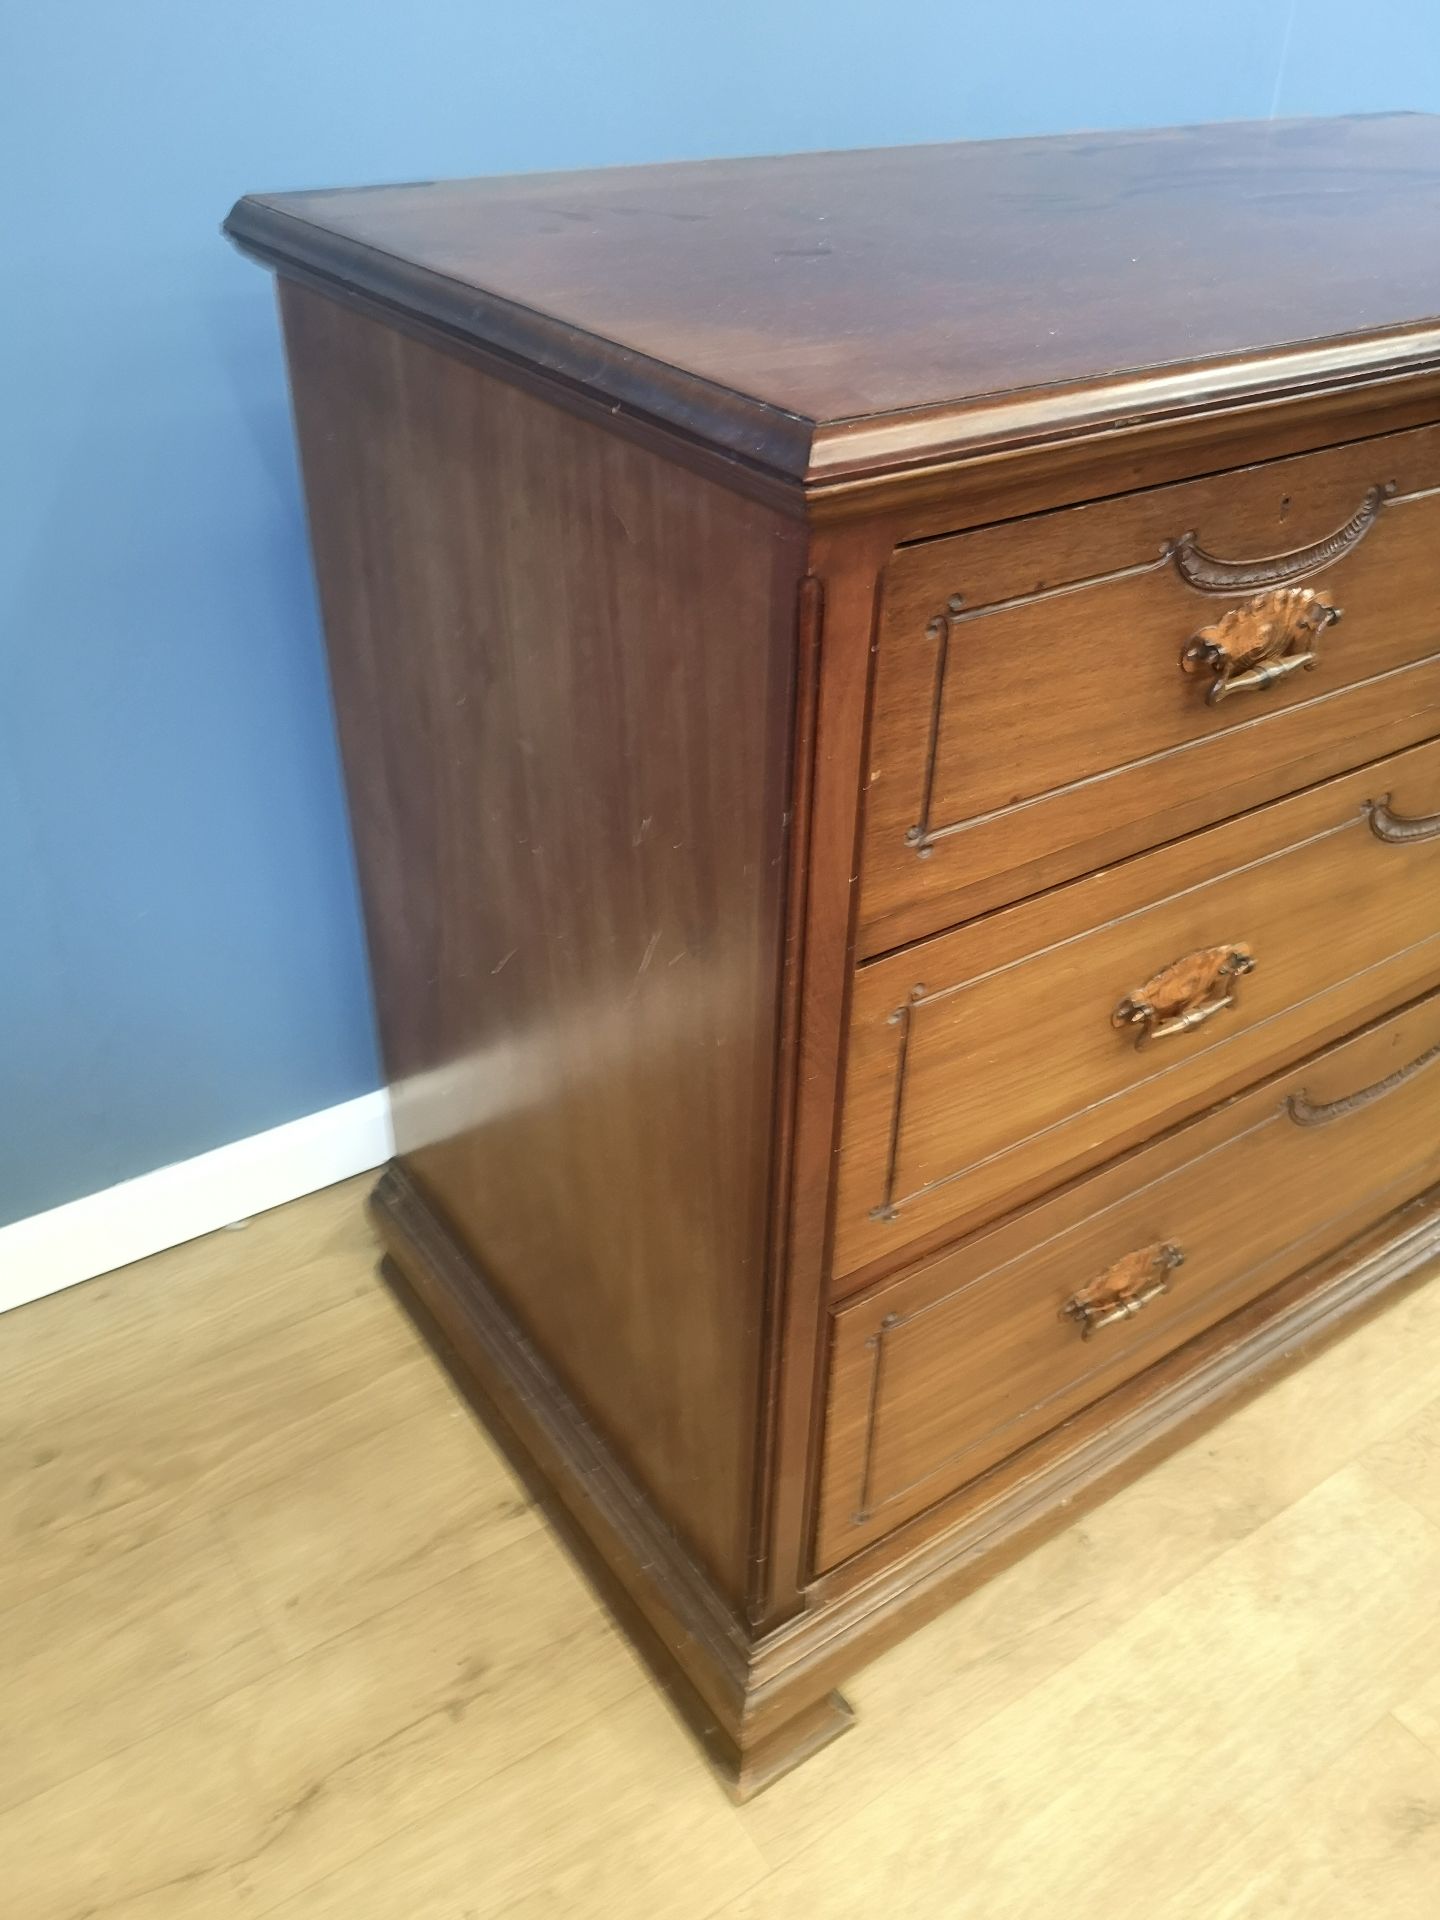 Mahogany chest of drawers - Image 3 of 6